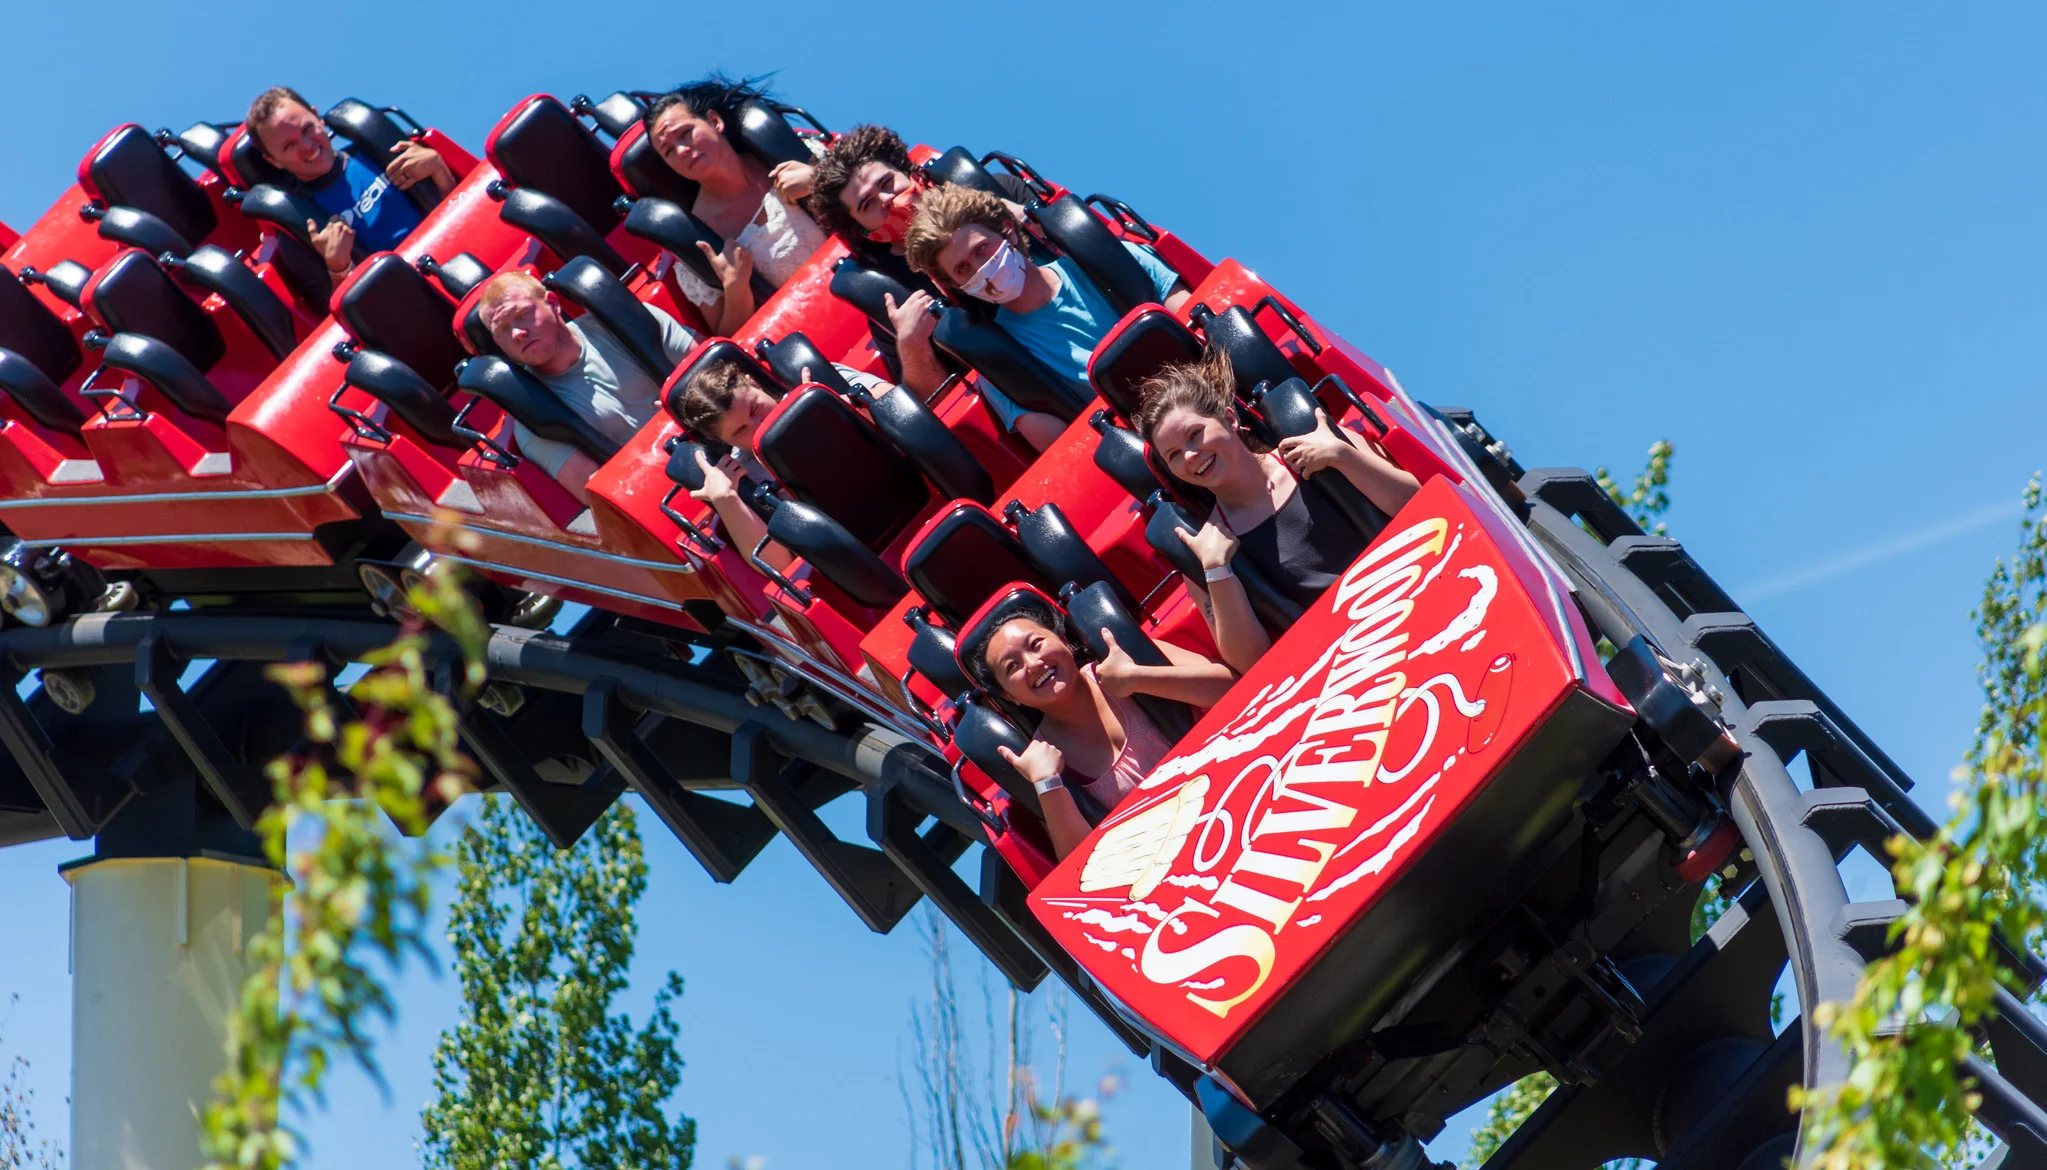 People enjoying the breathtaking red roller coaster at Silverwood Theme Park, one of the best things to see in Idaho